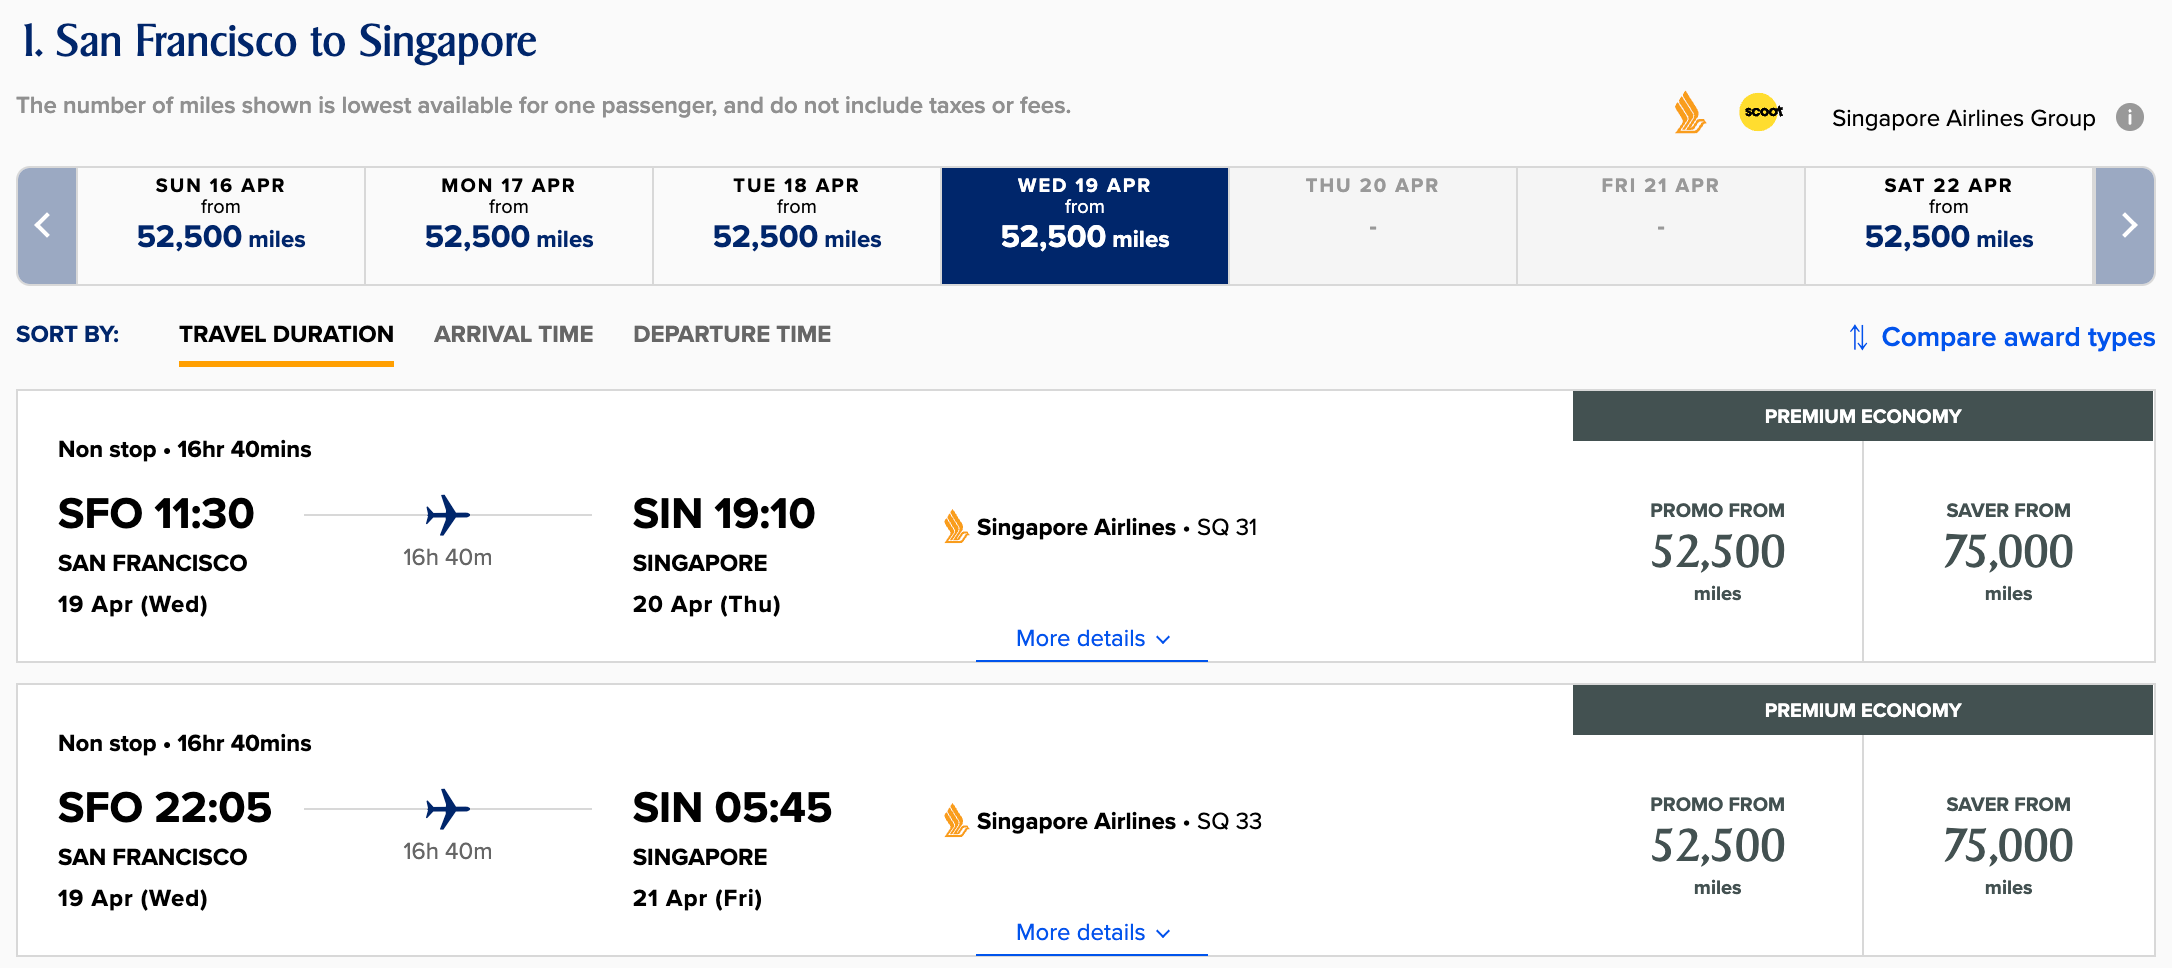 Booking a flight from SFO to SIN